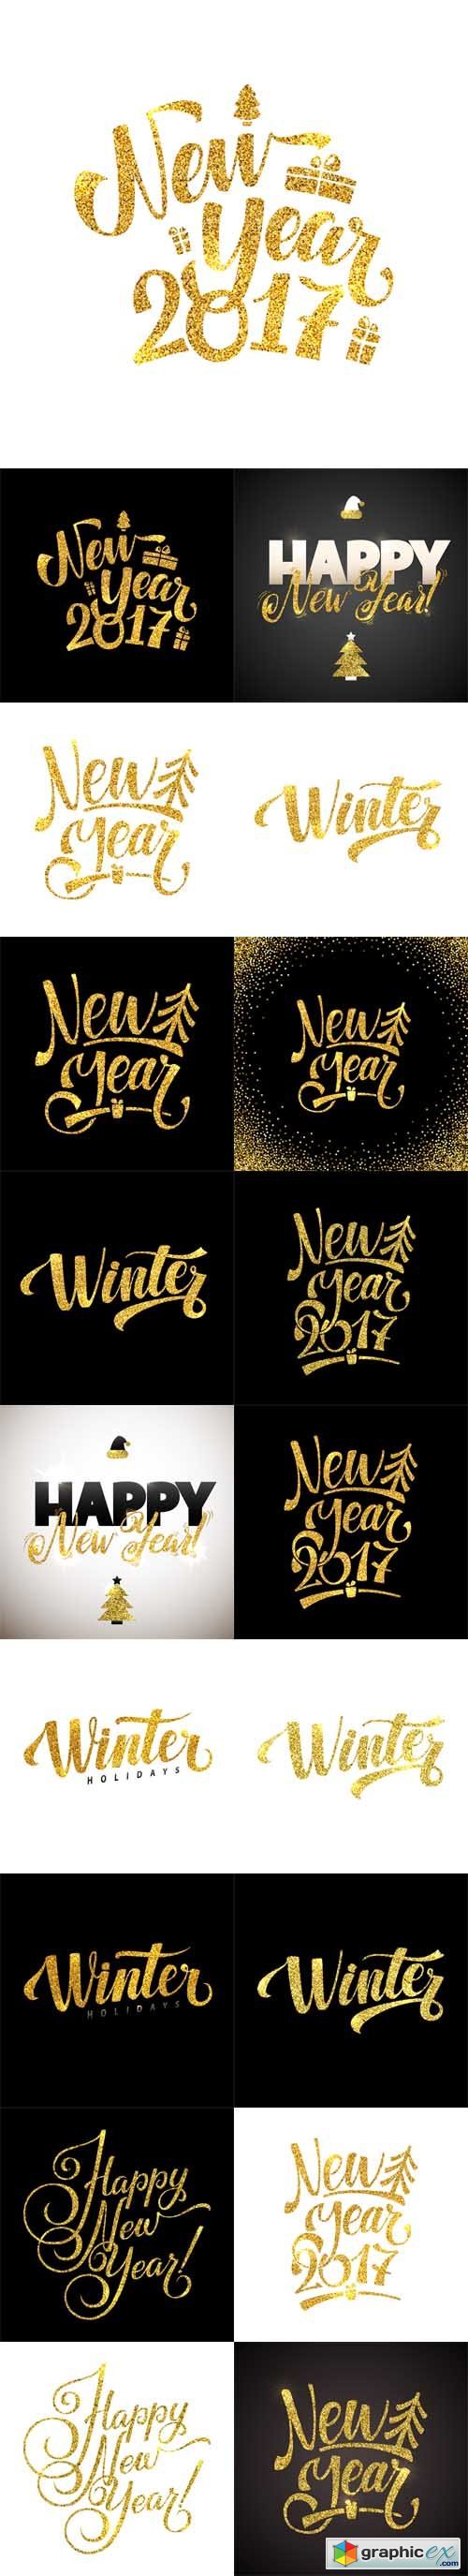 Golden Shiny Glitter. Calligraphy Greeting Poster Tamplate